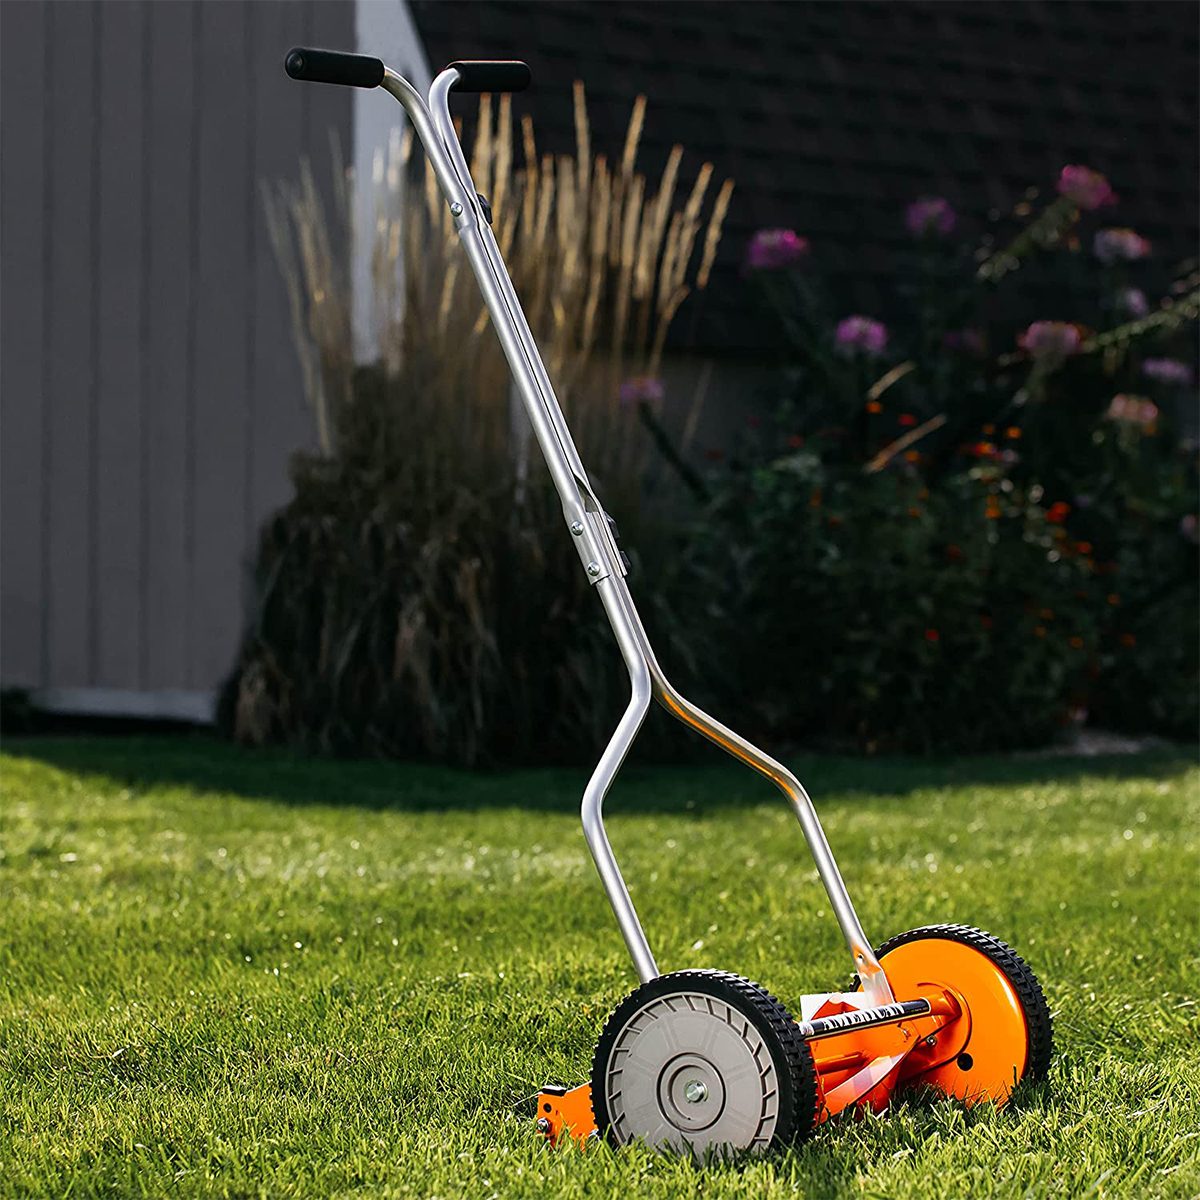 5 Best Cheap Lawn Mower Models for Yard Care on a Budget